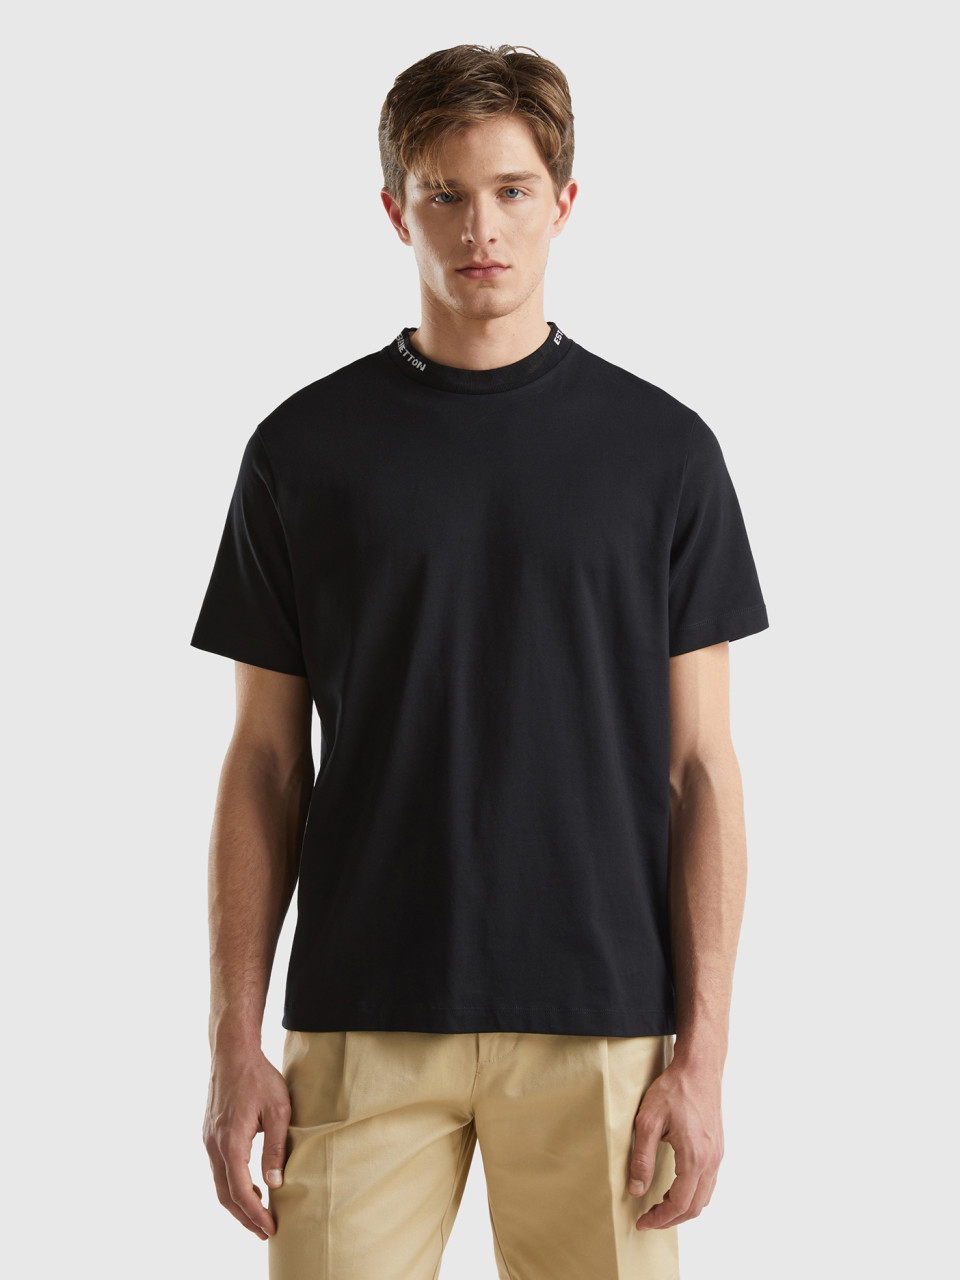 Benetton, Black T-shirt With Embroidery On The Neck, Black, Men